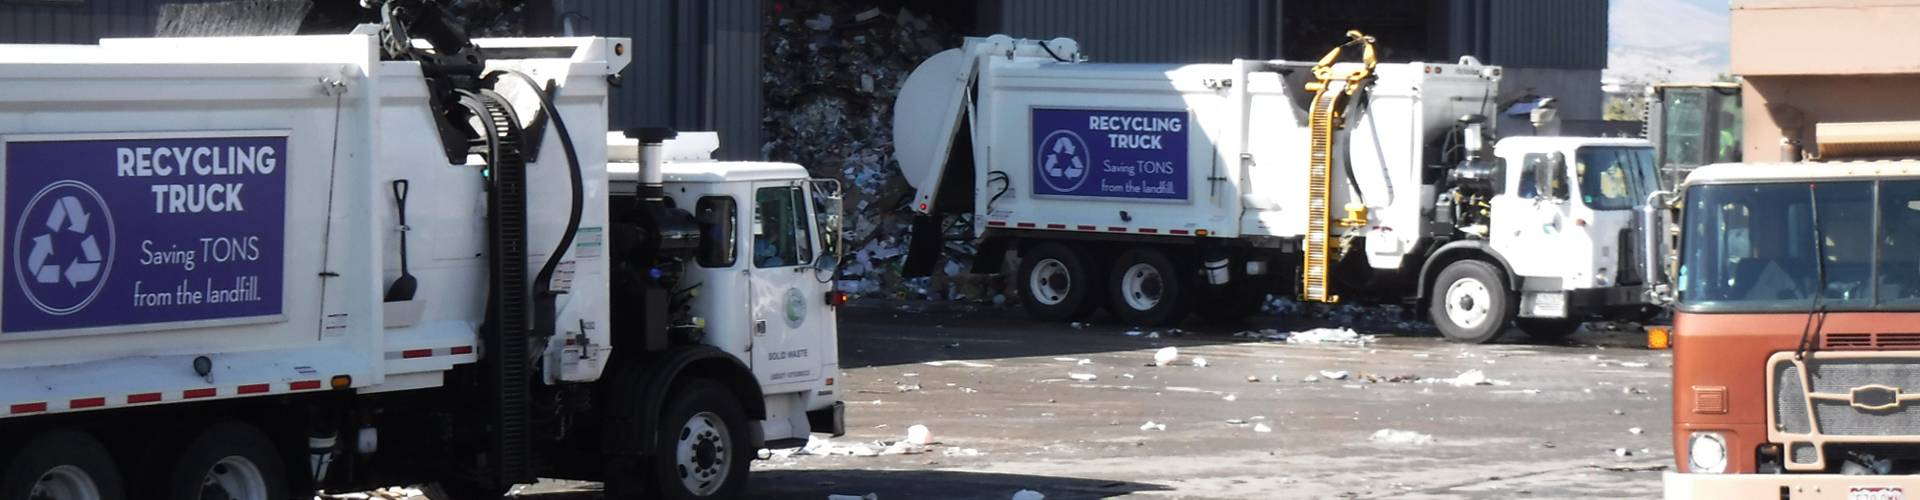 Recycling Trucks at Recycling Center